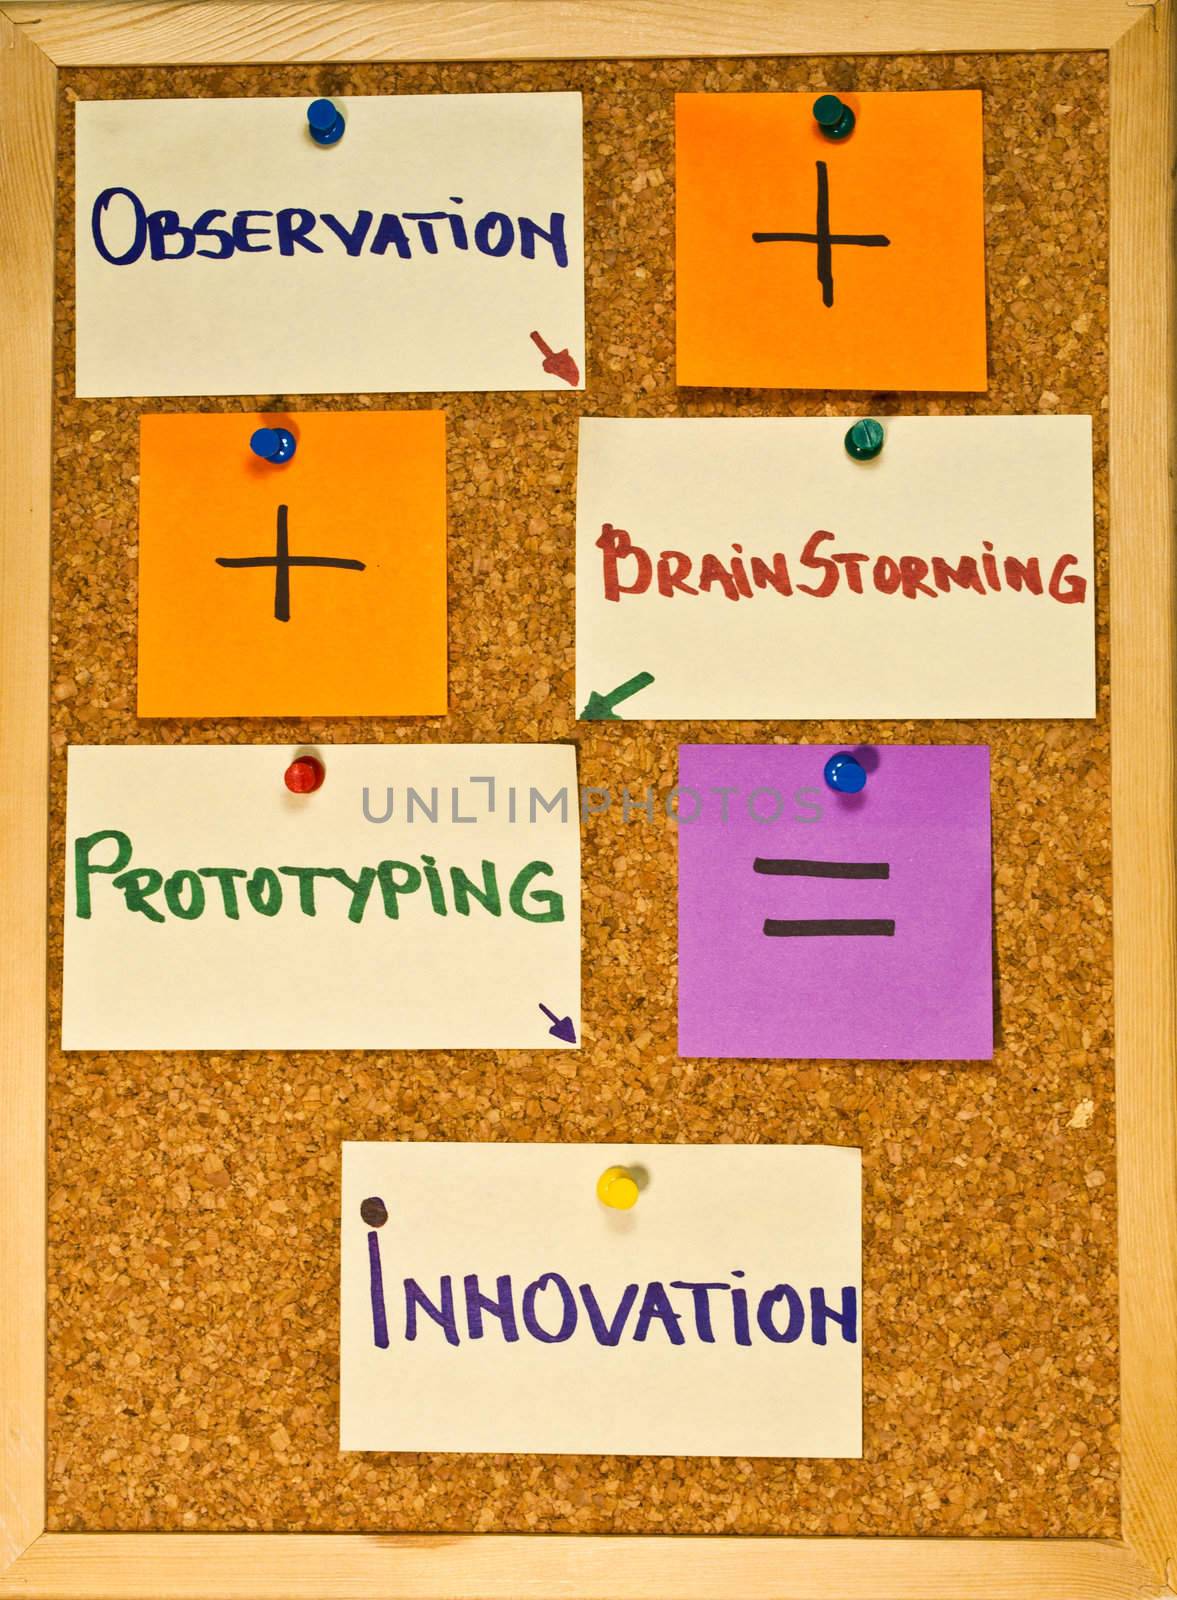 Post it notes on a wooden board representing three stages of innovation